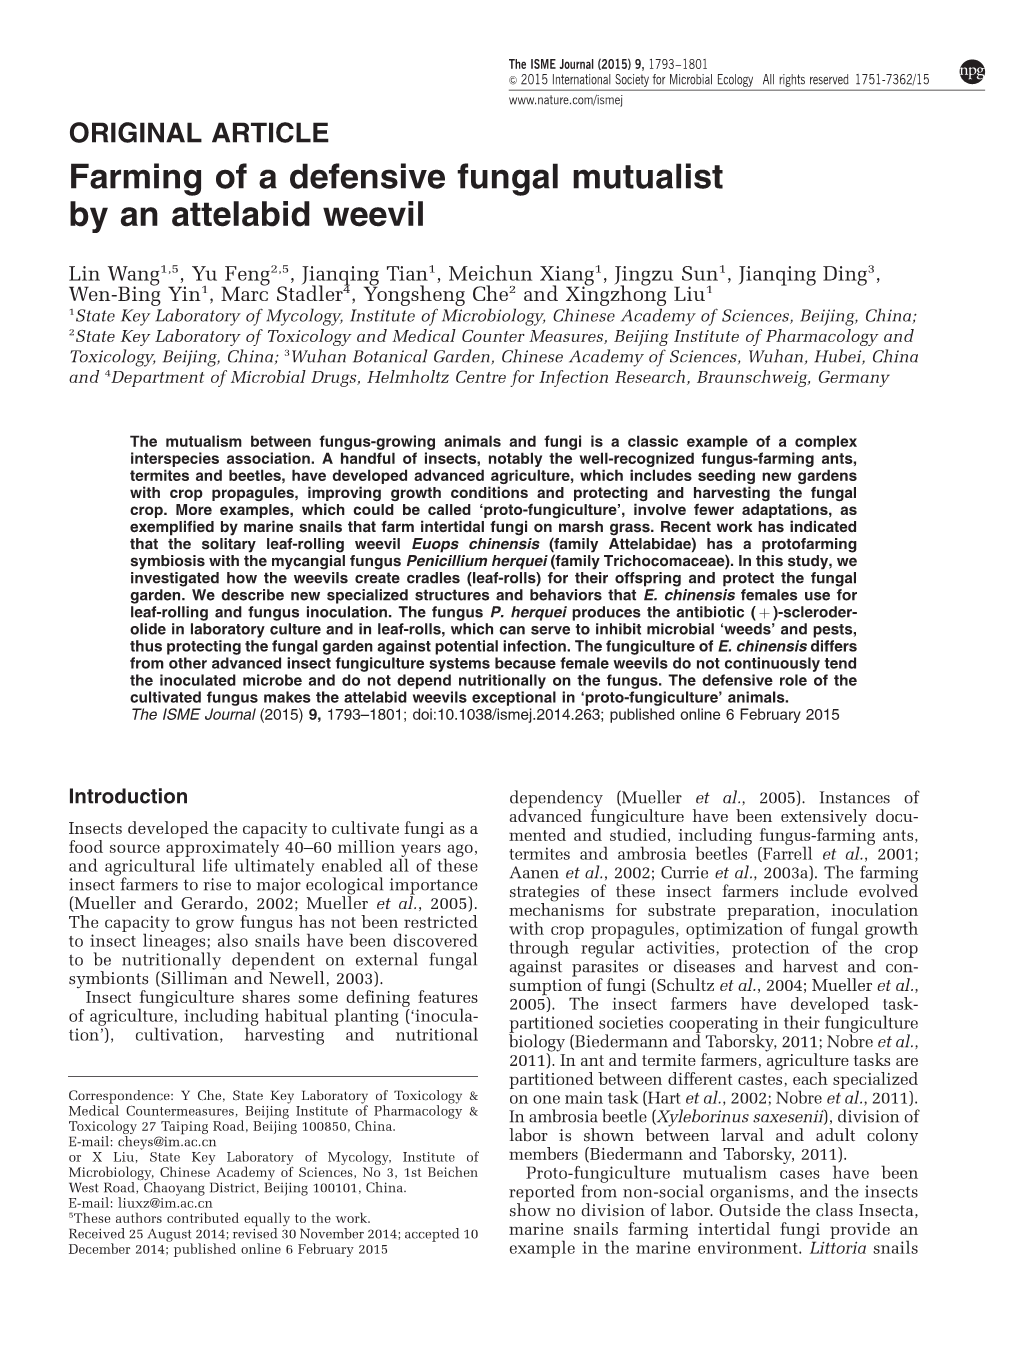 Farming of a Defensive Fungal Mutualist by an Attelabid Weevil